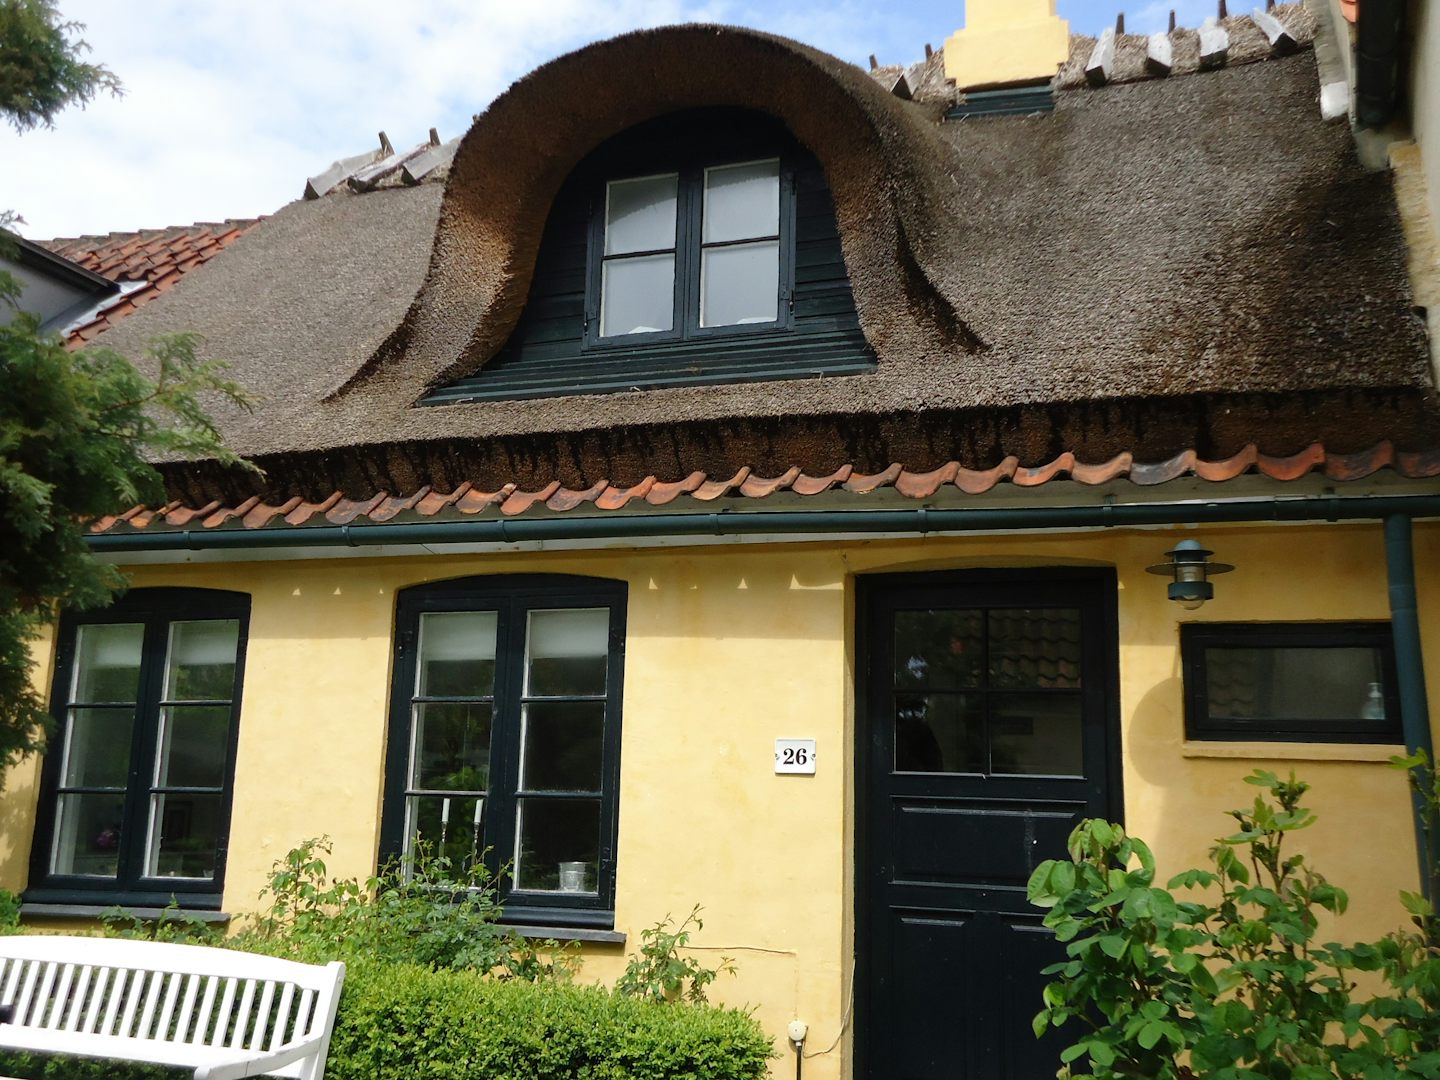 Quaint homes in the village of Dragor, Denmark